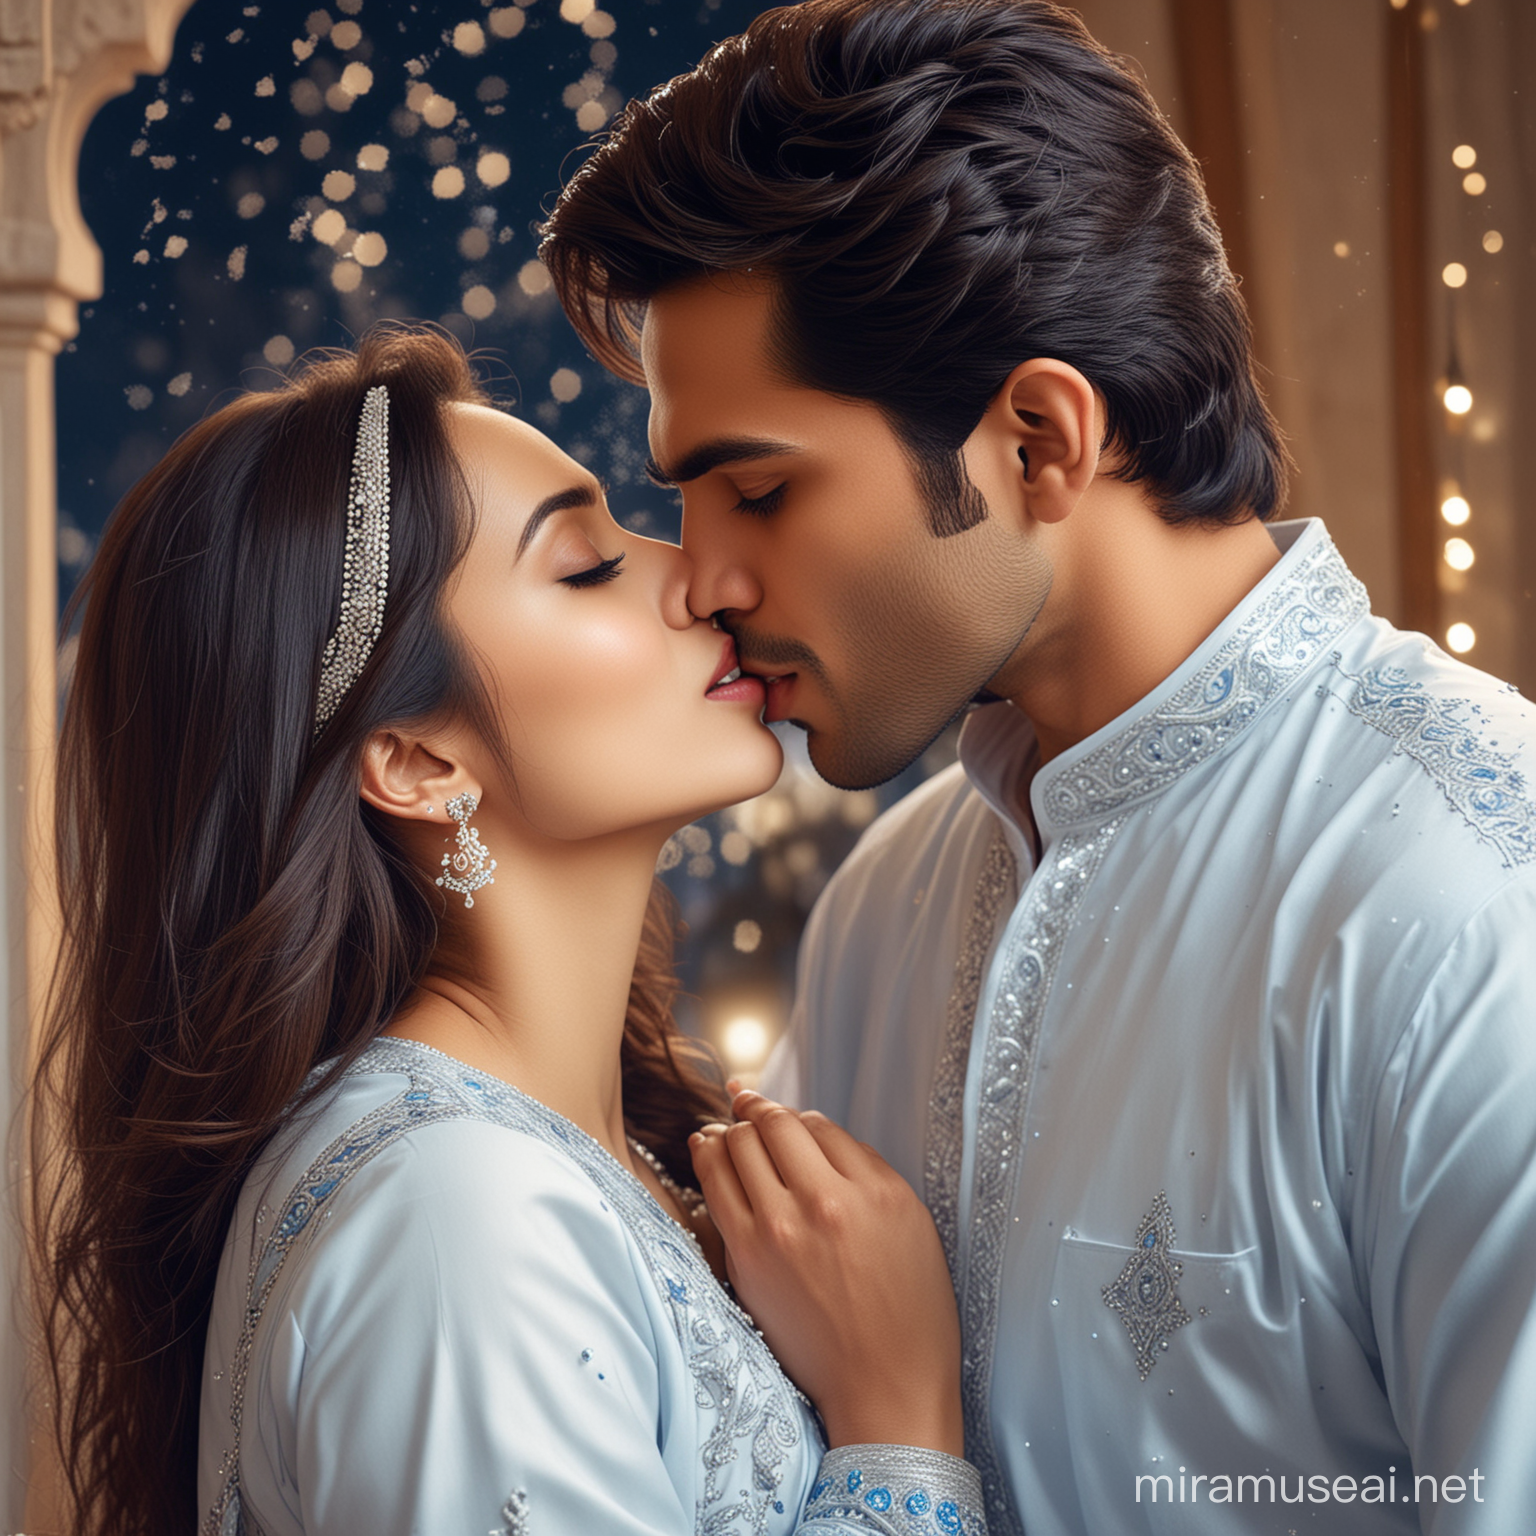 create hyper-realistic life-like ultra-hd highly-detailed portrait of a handsome young Pakistani man in blue kamiz and white shalwar kissing passionately in a romantic way with a young beautiful charming Pakistani woman on Eid ul Fitr and there is a glittering text "Eid ul Fitr Mubarik" written in background 